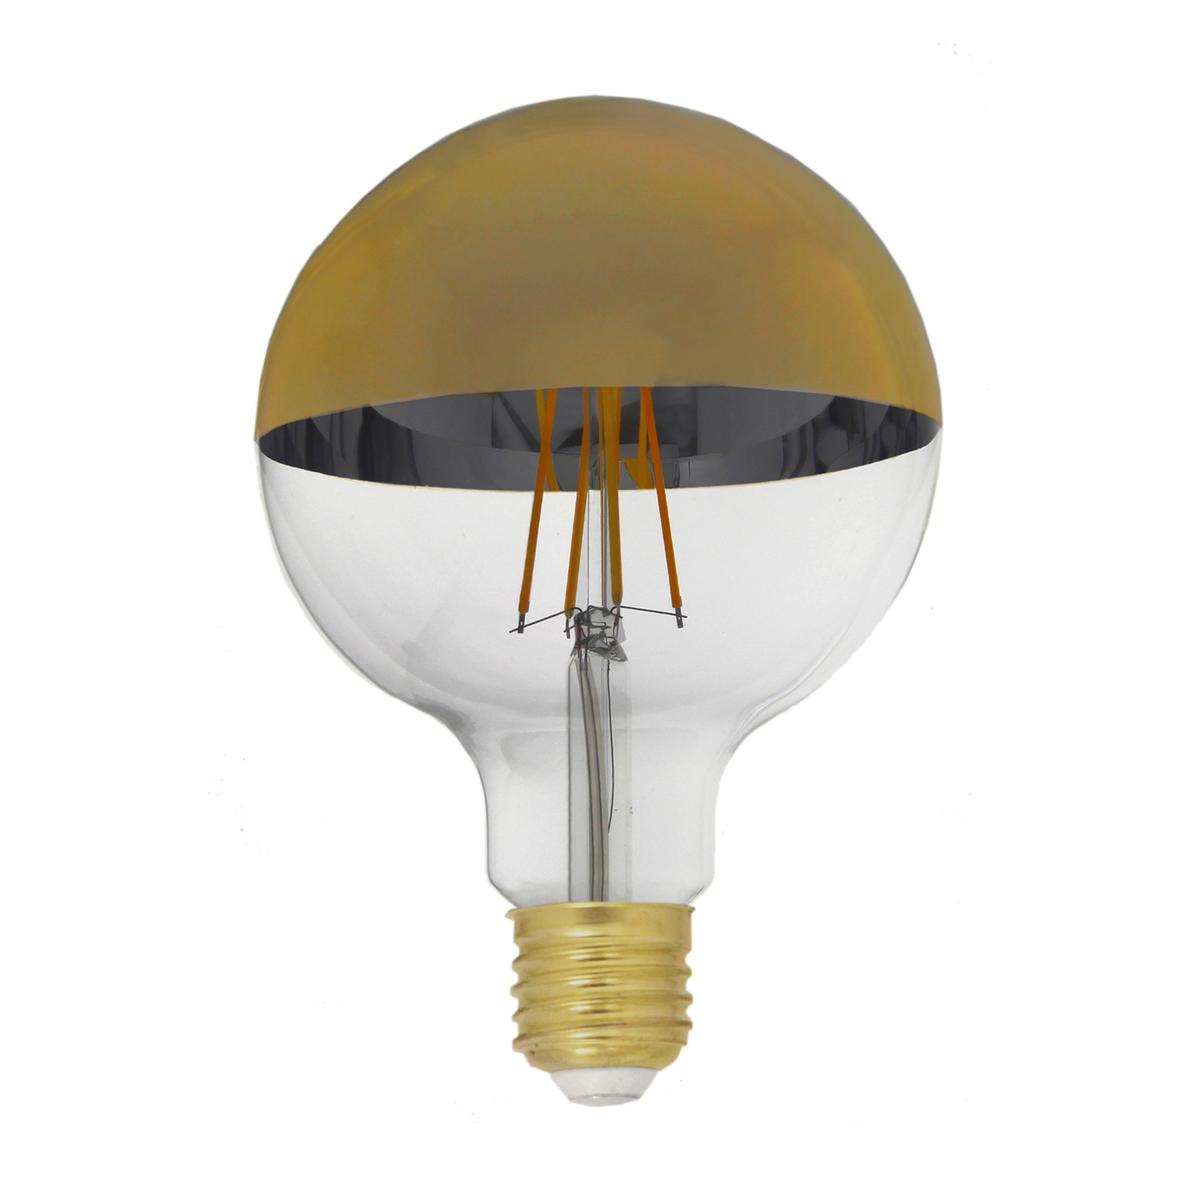 Ampoule LED E27 Filament Dimmable 8W G95 Globe Reflect Or